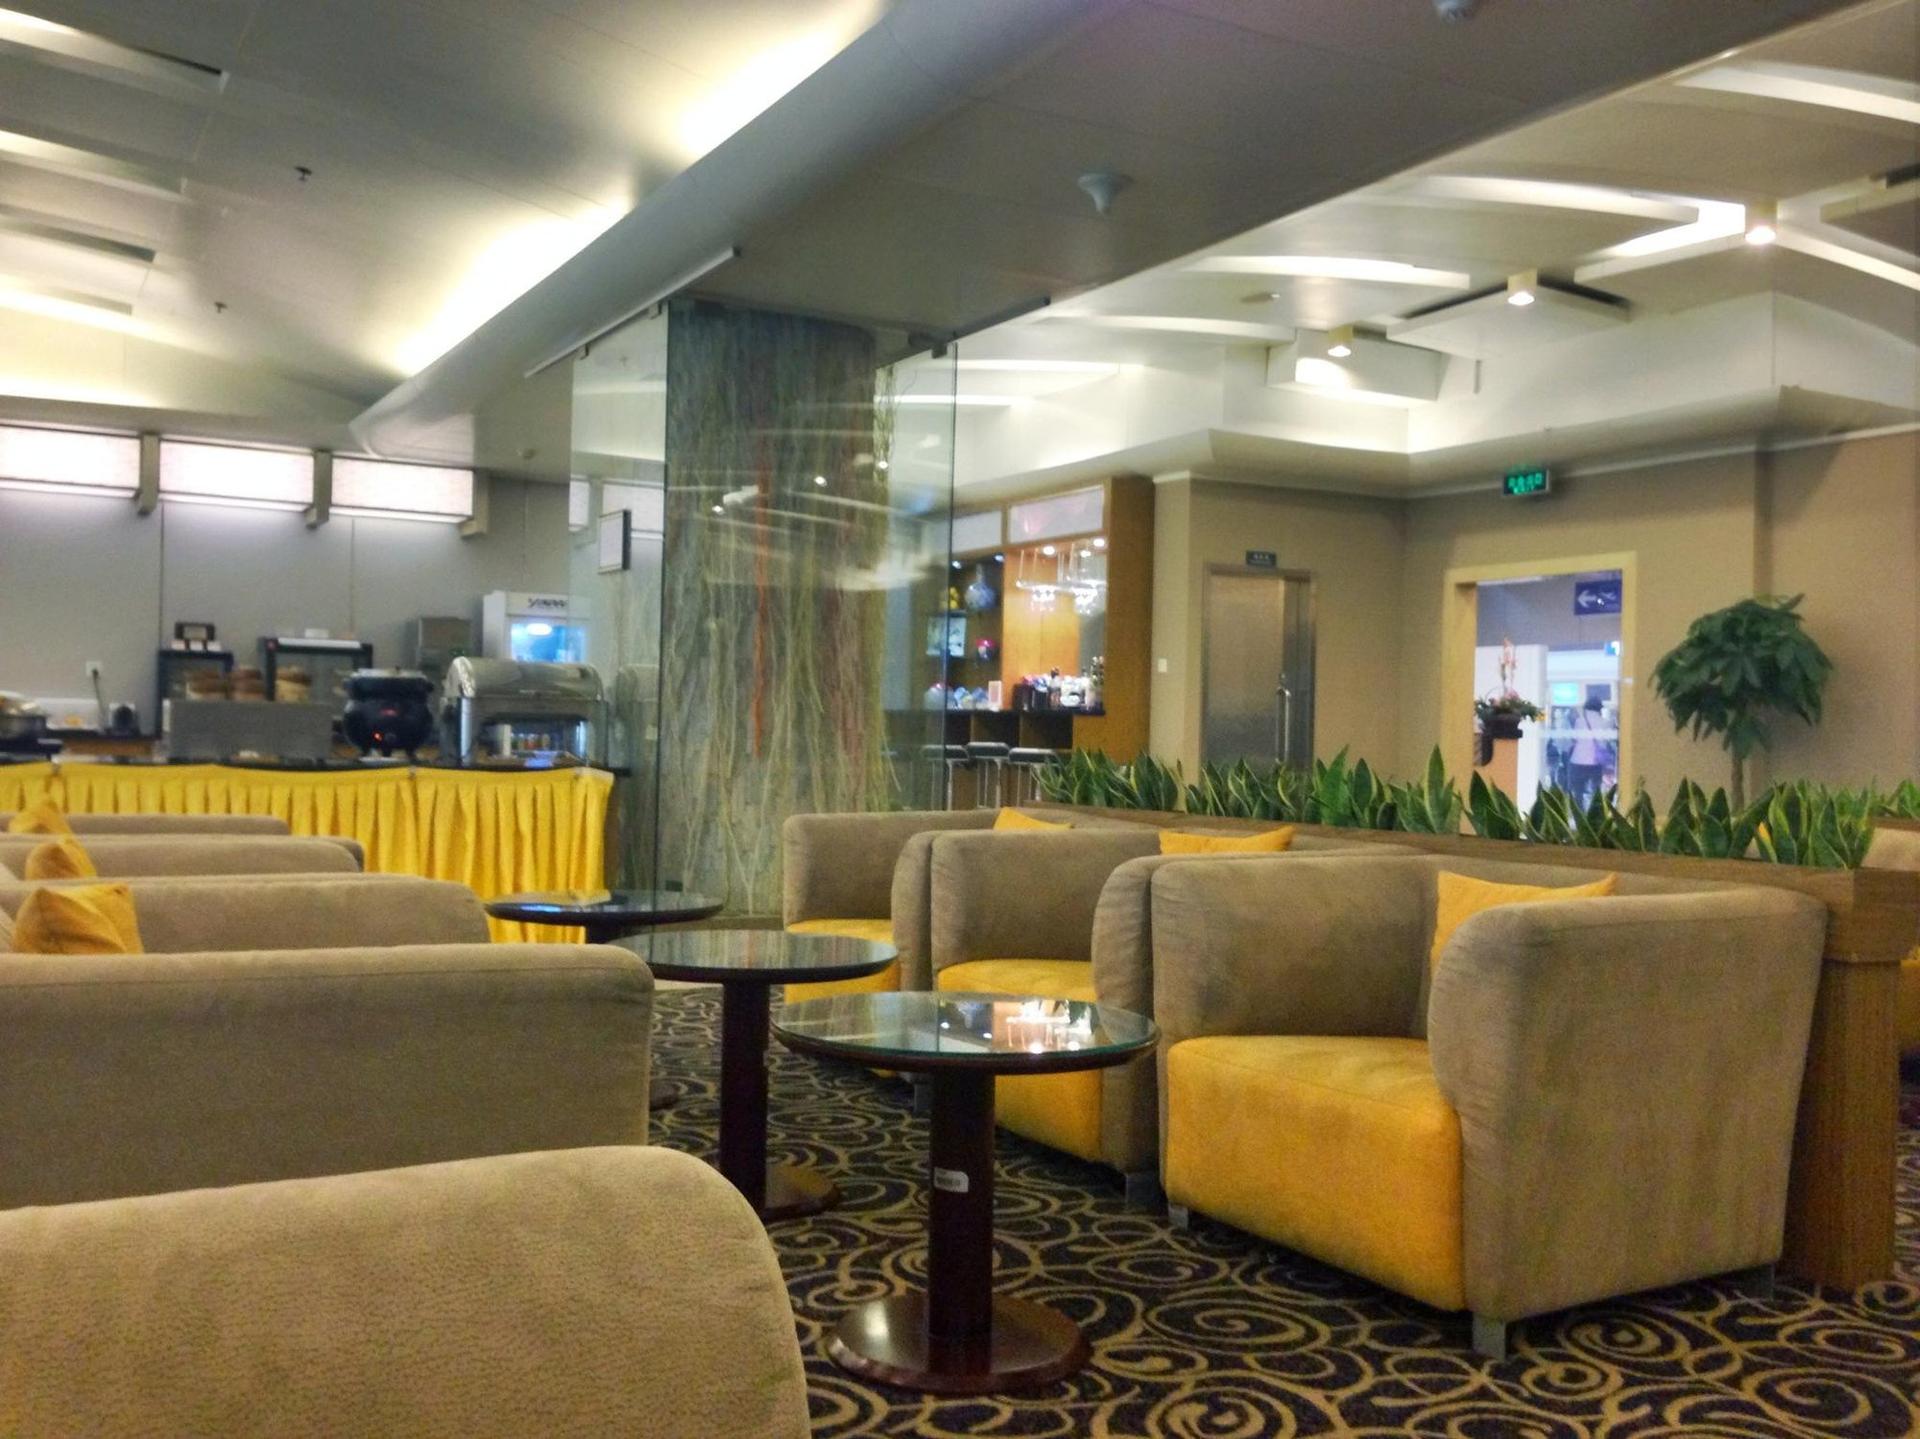 Air China First & Business Class Lounge image 10 of 12